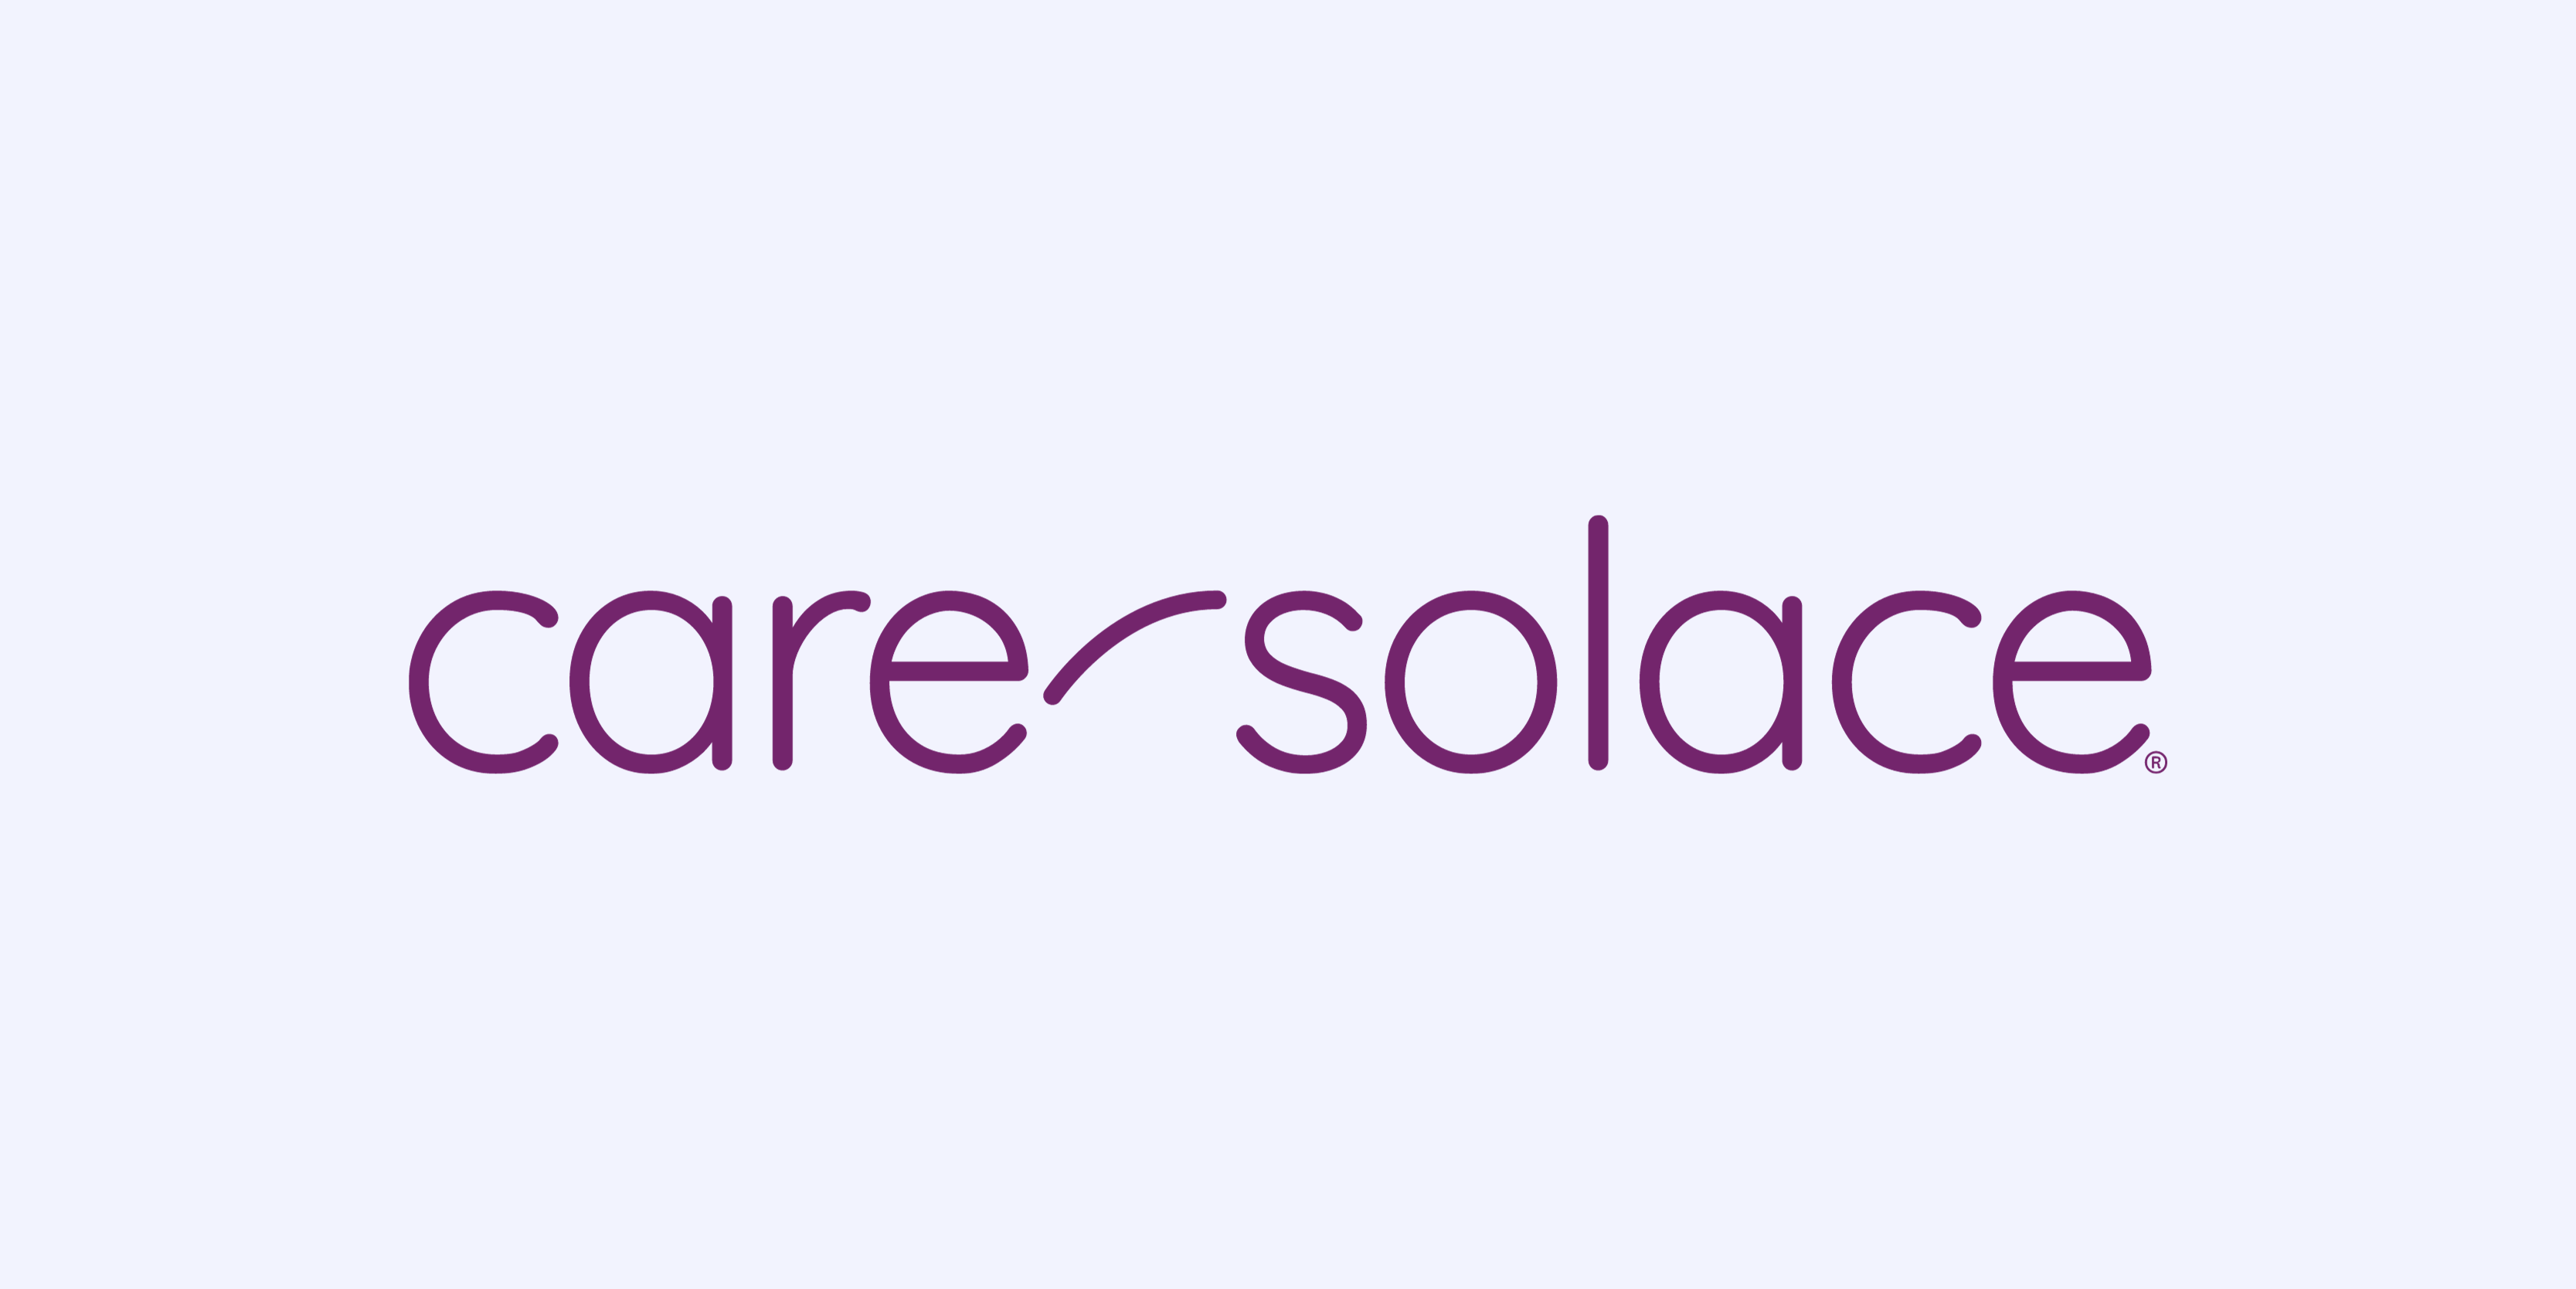 Care Solace